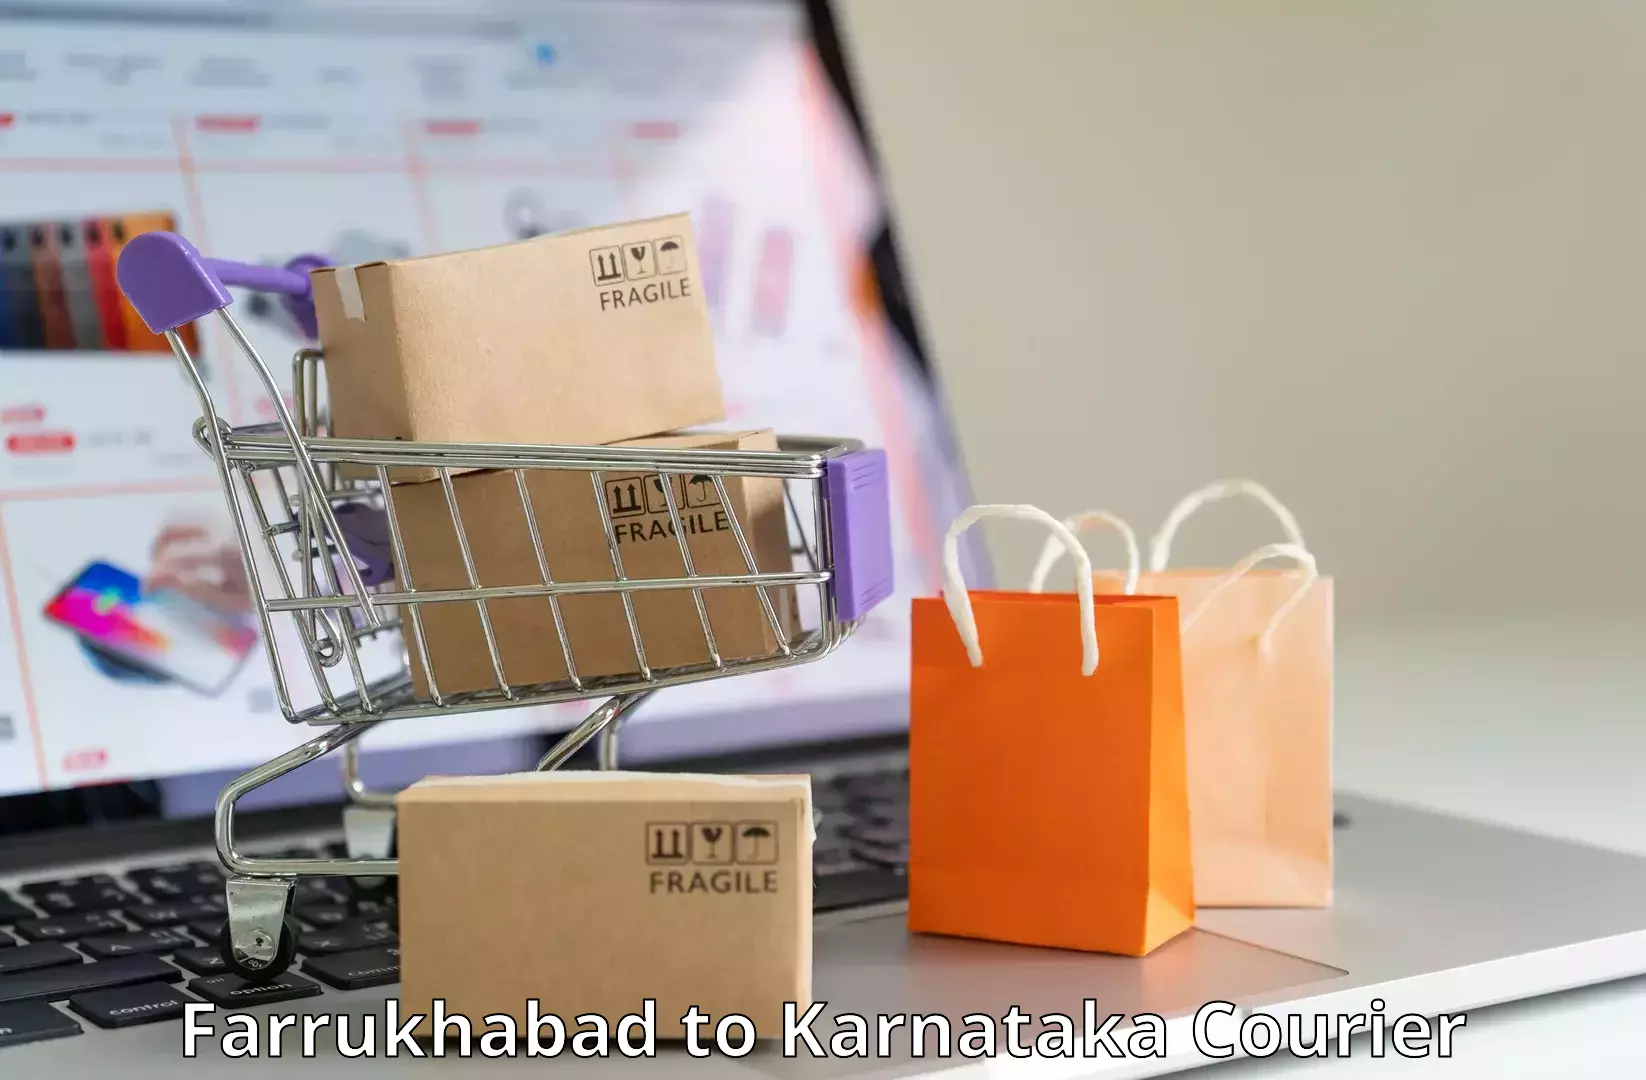 Customer-focused courier Farrukhabad to Mangalore